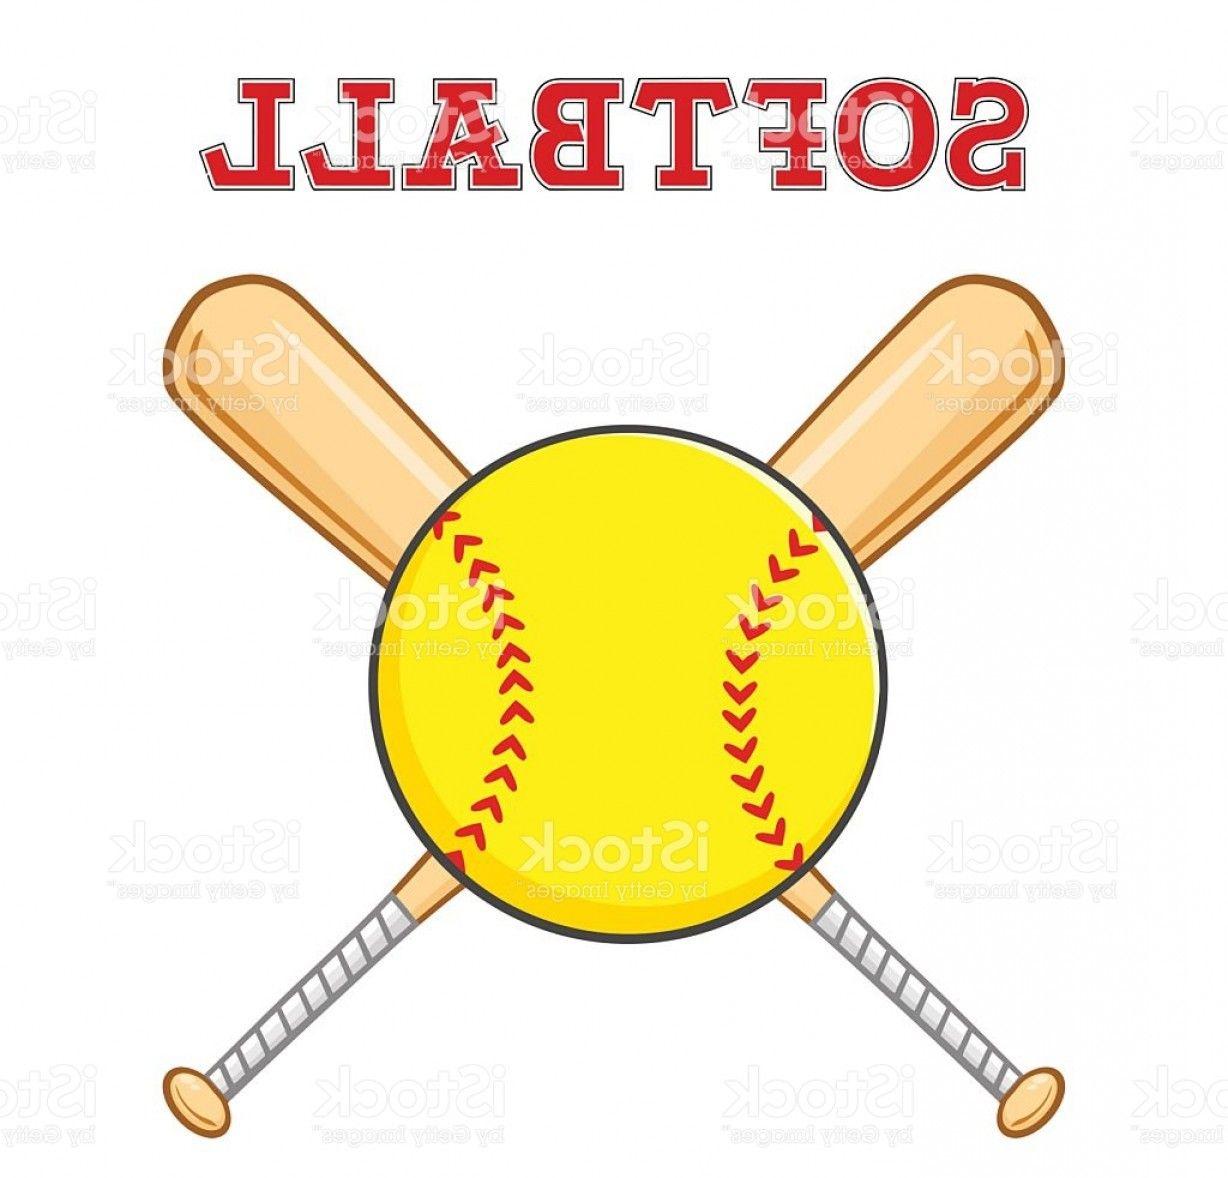 Baseball Crossed Bats Logo - Softball Over Crossed Bats Logo With Text Gm | ARENAWP